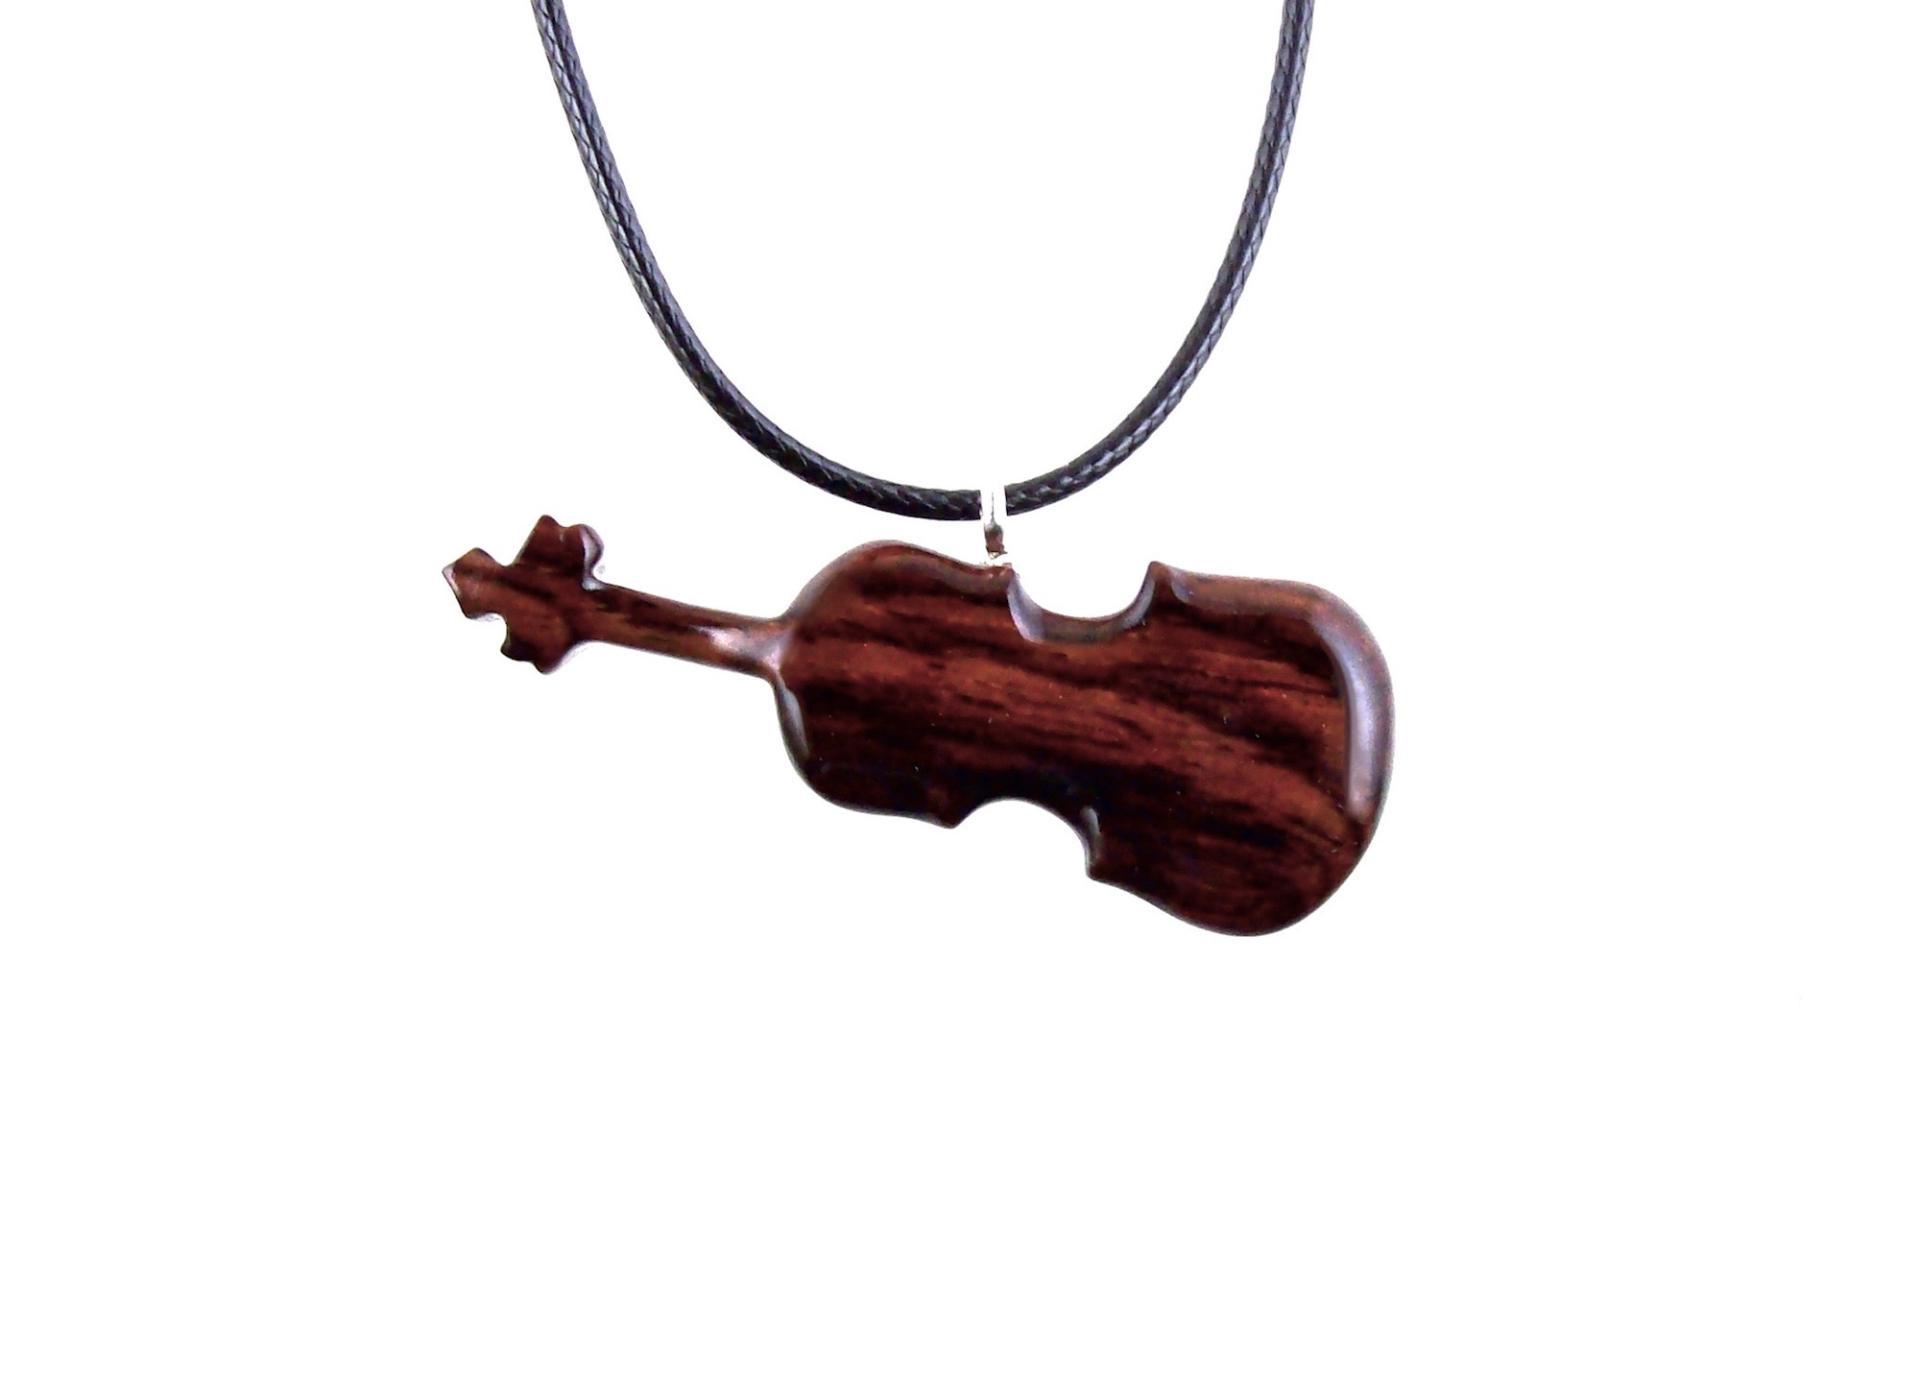 Violin Necklace, Hand Carved Wooden Violin Pendant, Music Instrument Wood Jewelry, One of a Kind Violonist Gift